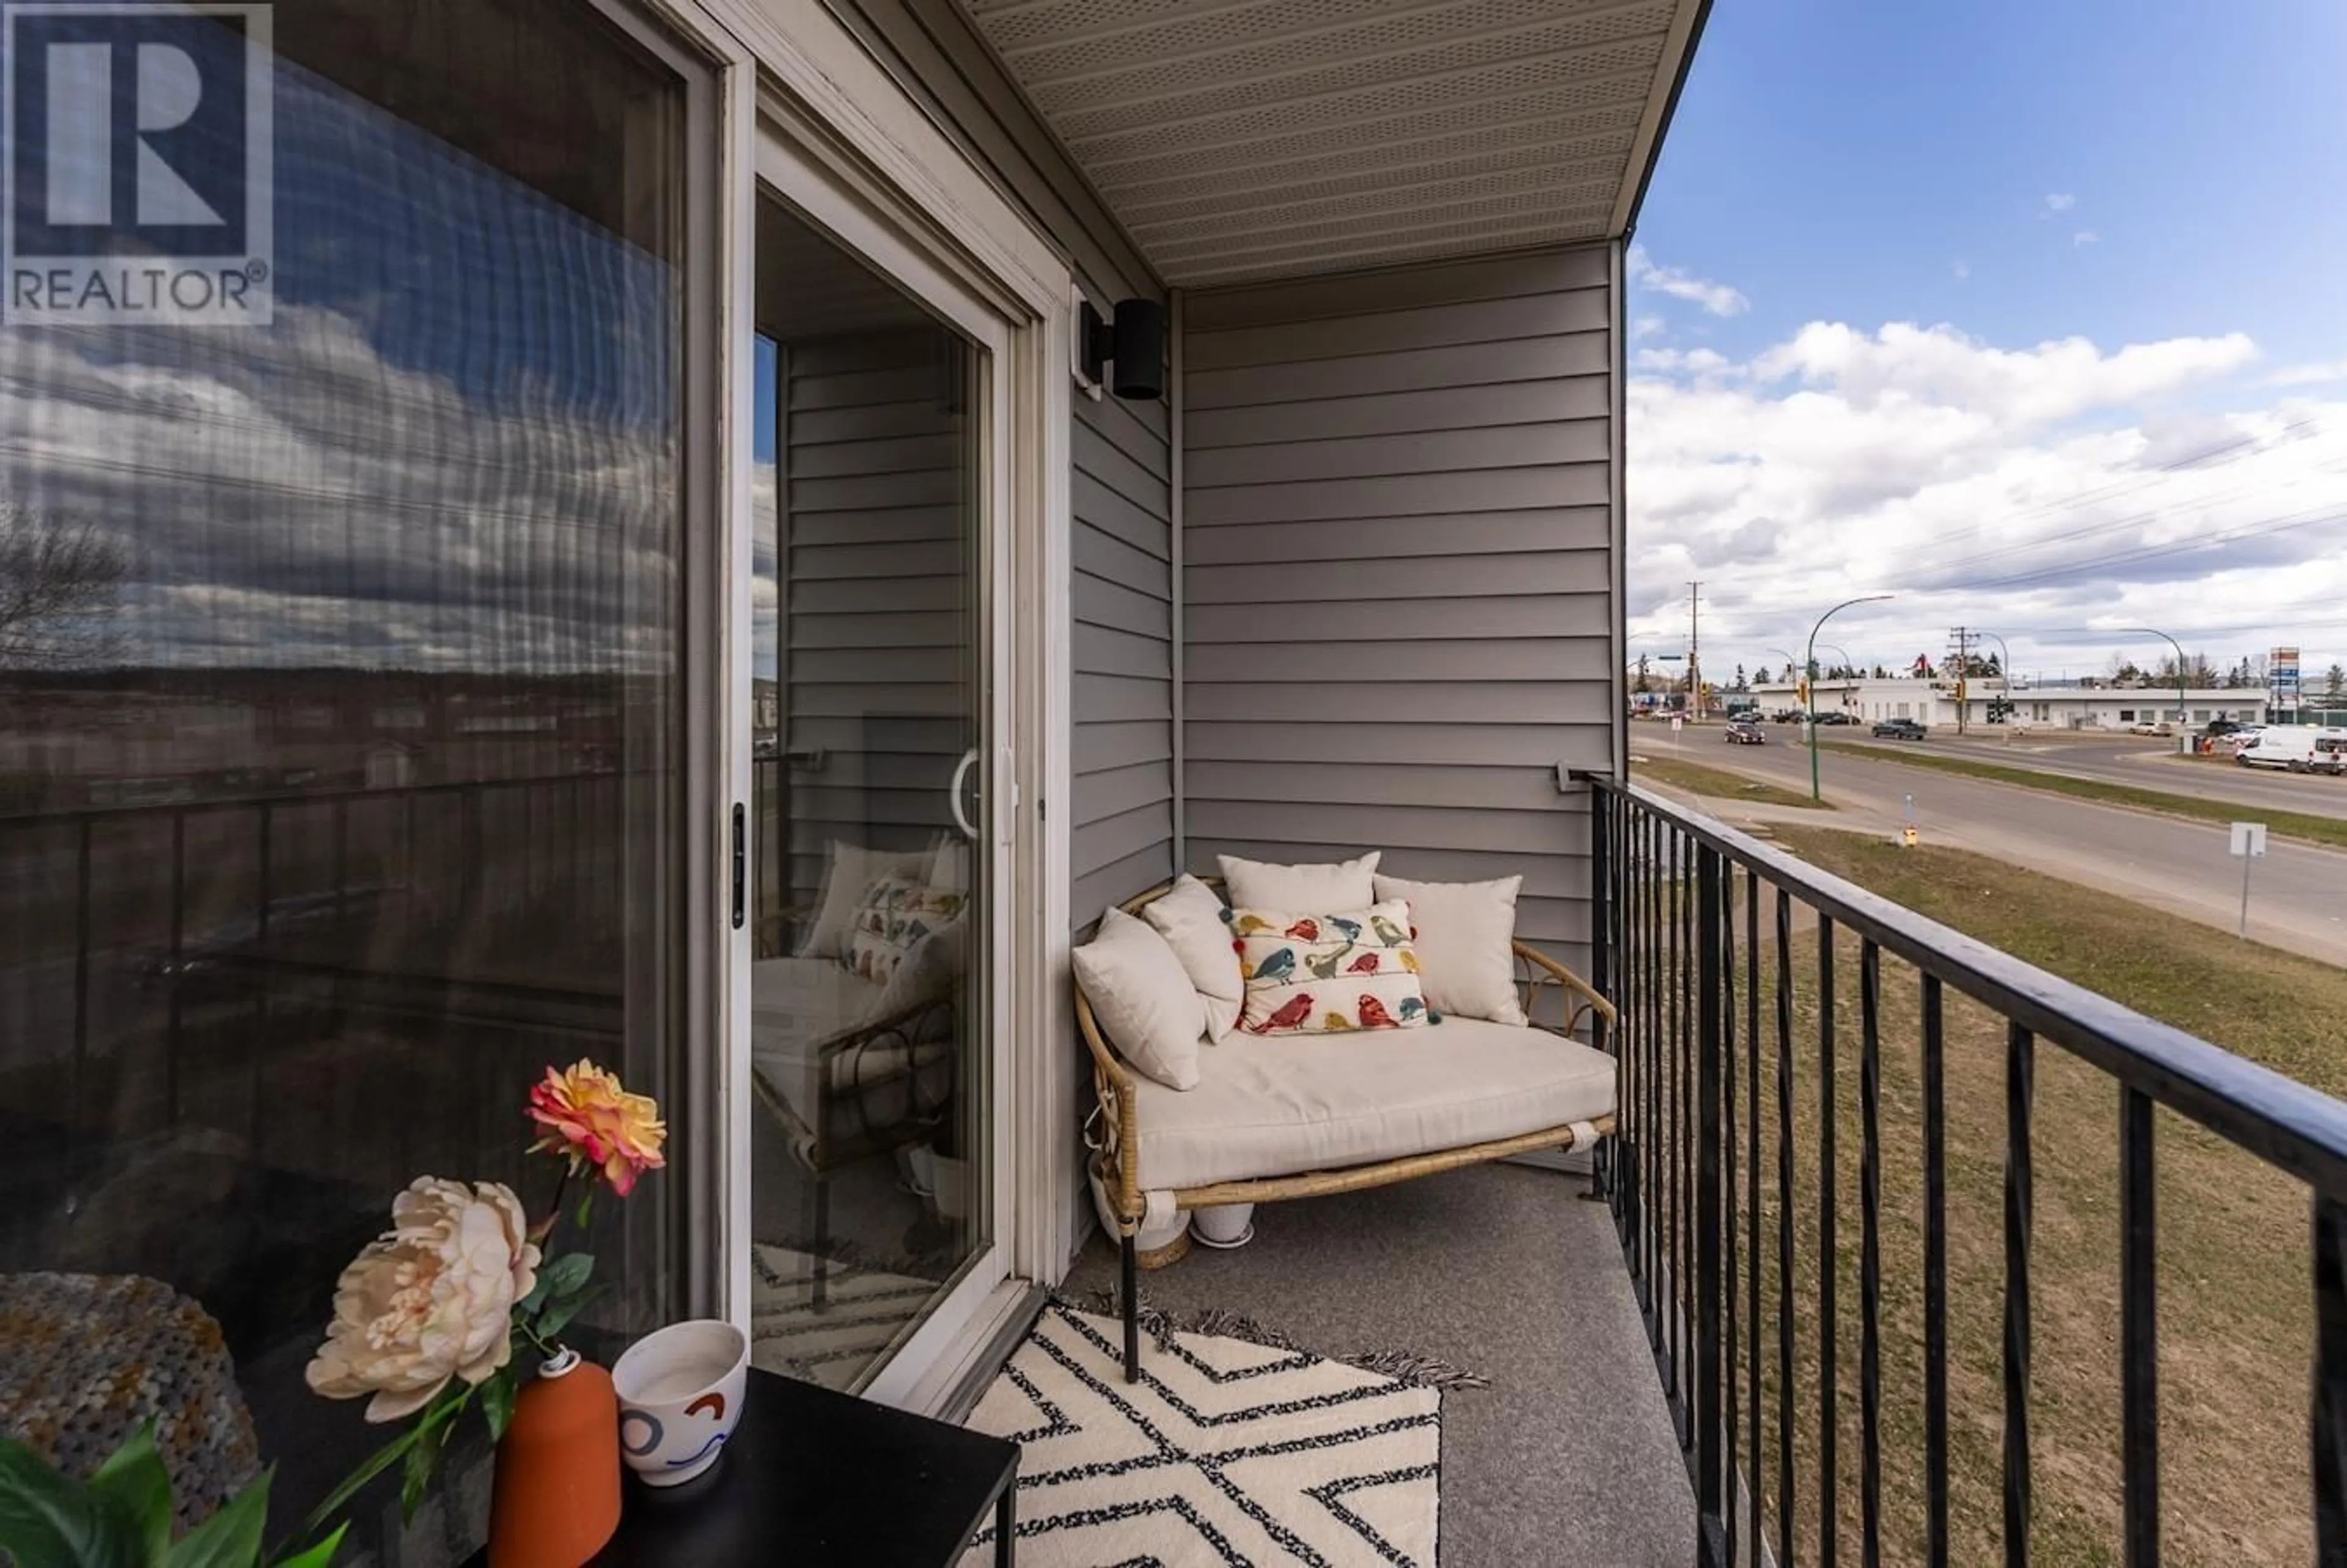 Balcony in the apartment for 306 3777 MASSEY DRIVE, Prince George British Columbia V2N4J6